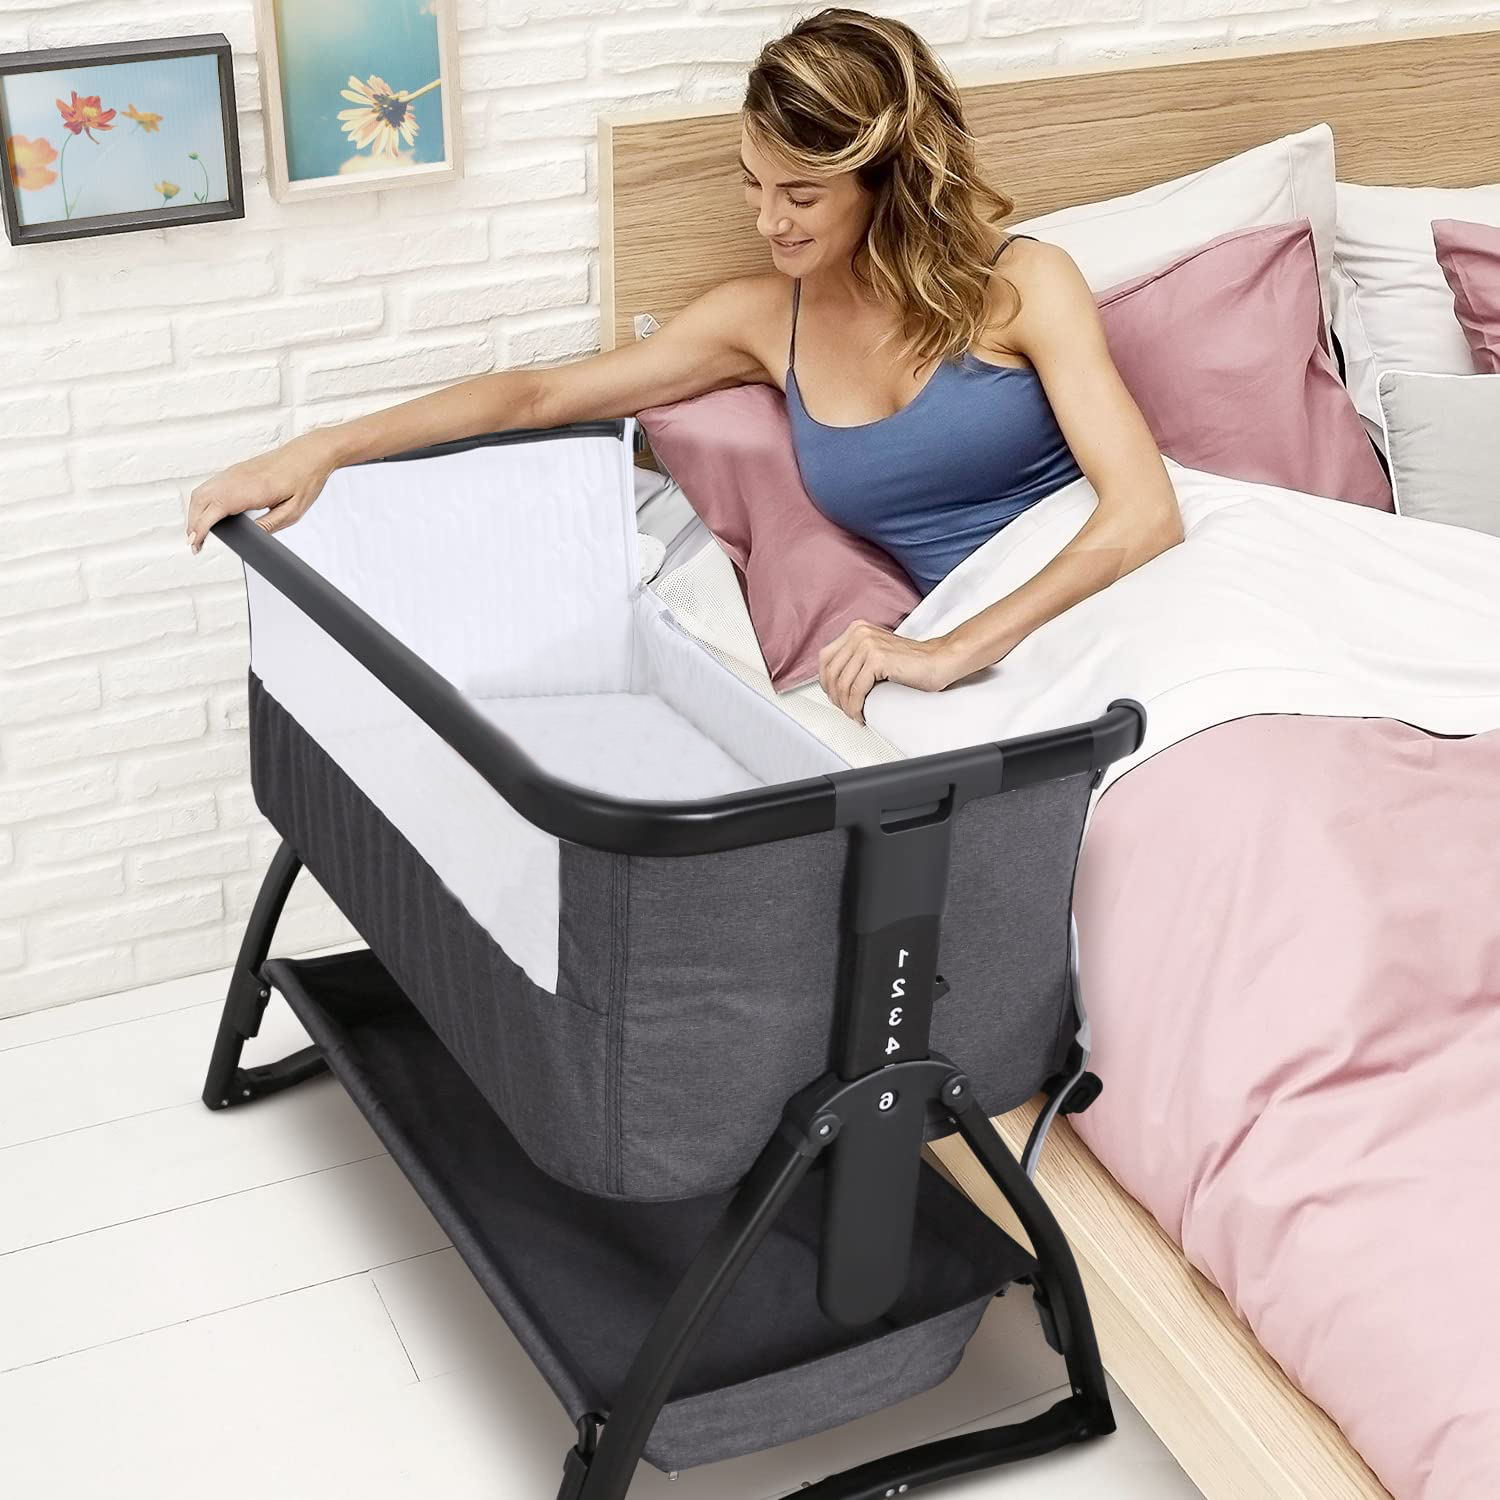 Adnoom Baby Bassinet Bedside Sleeper, Baby Bed to Babies Cradle, Adjustable 7-Level Height Portable Bed for Newborn/ Infant/ Baby Boy/ Baby Girl (Light Gray) - image 1 of 12